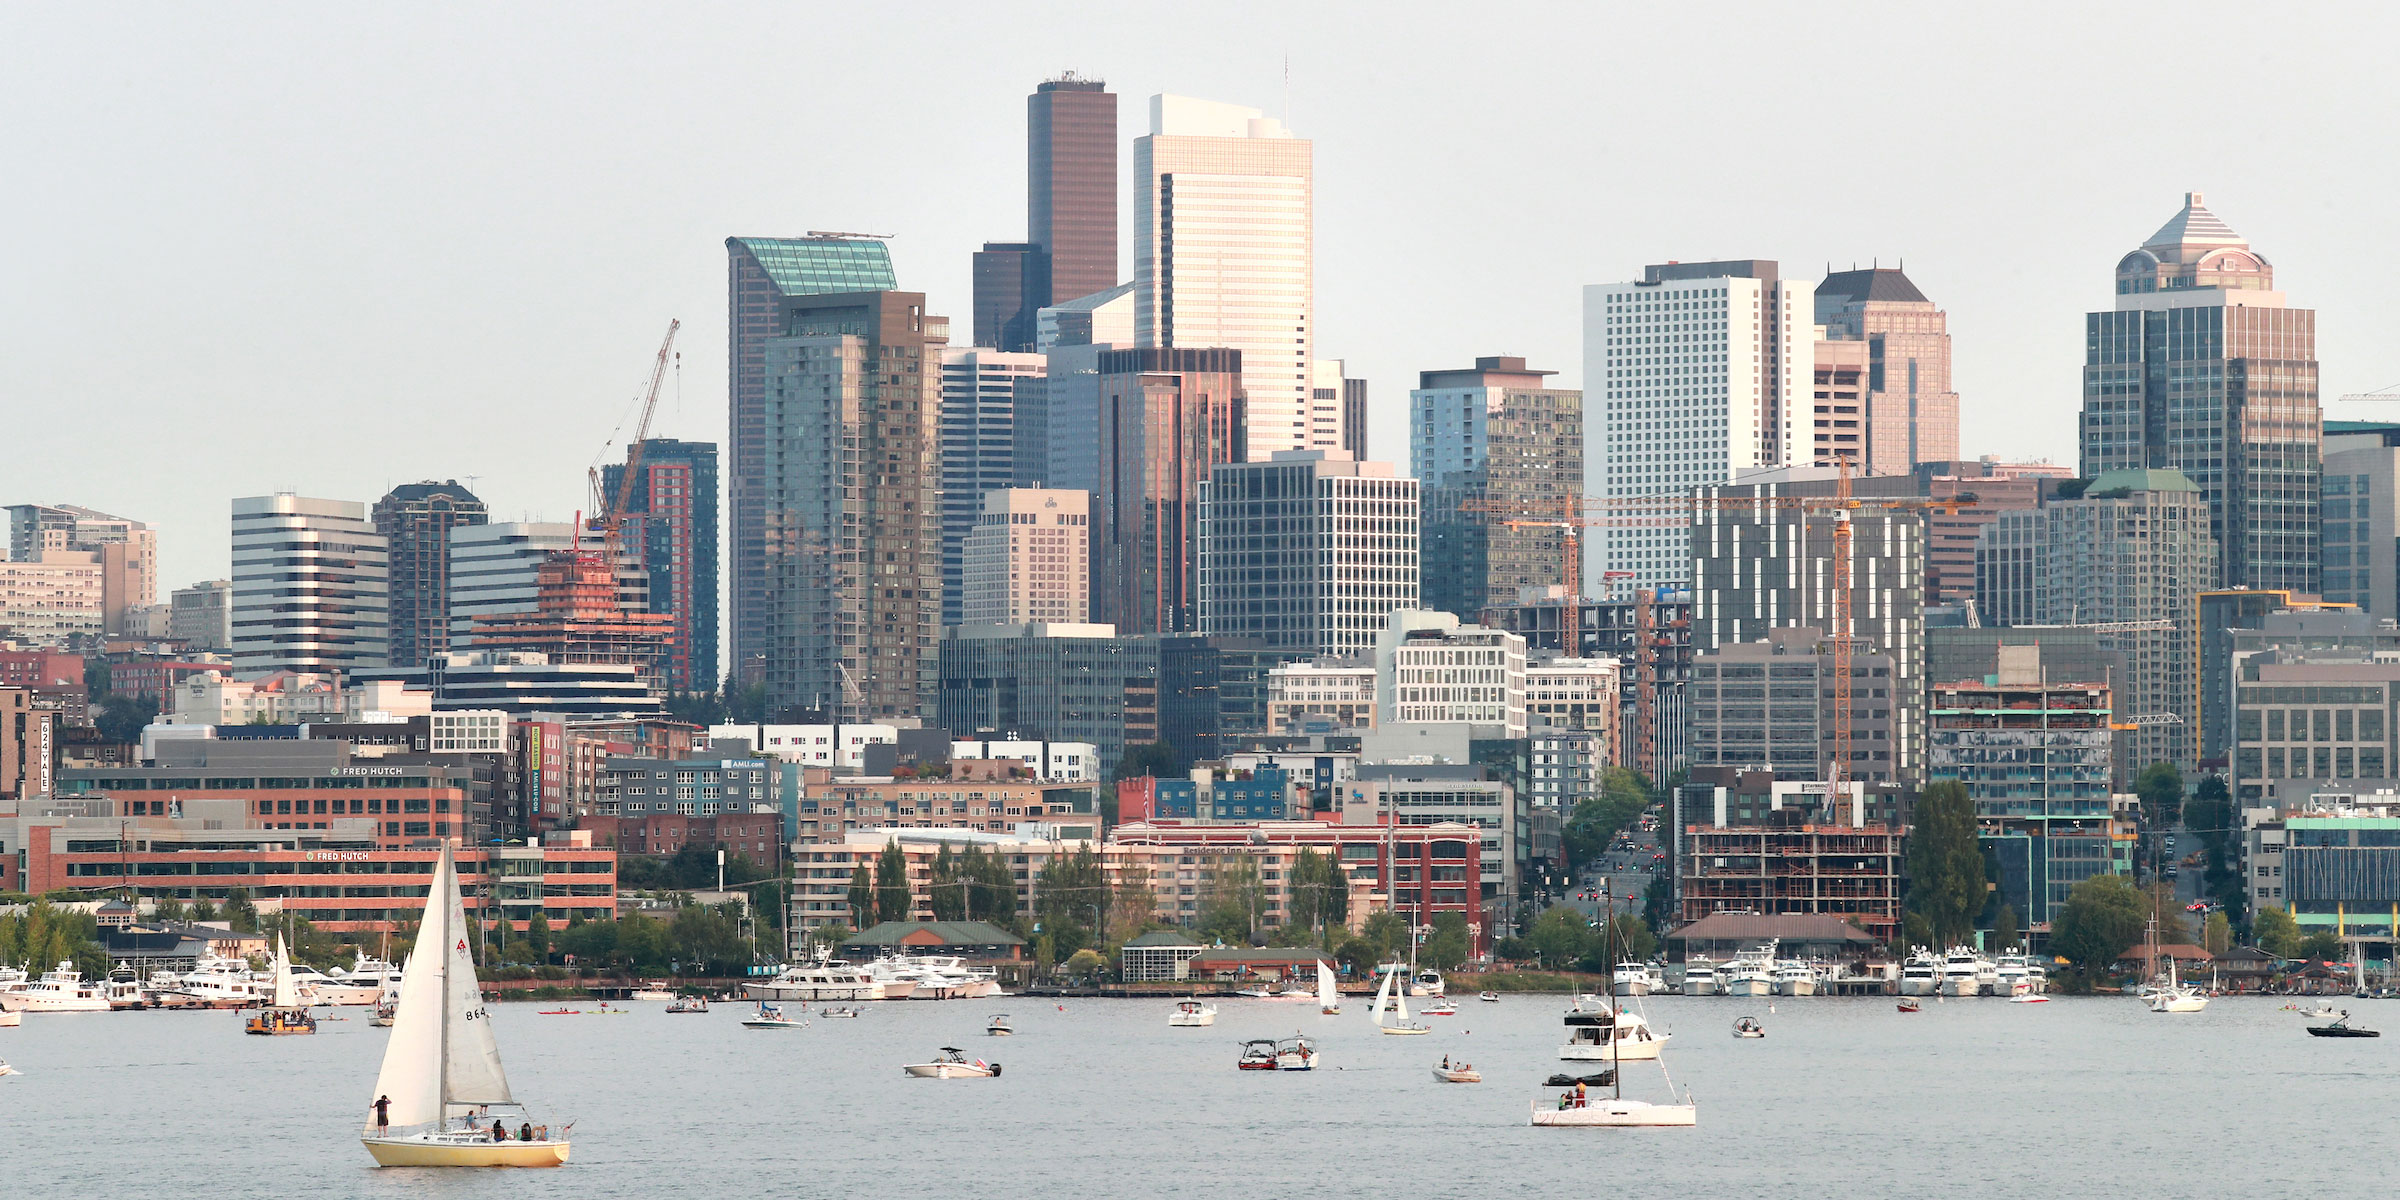 the South Lake Union waterfront from Gas Works park